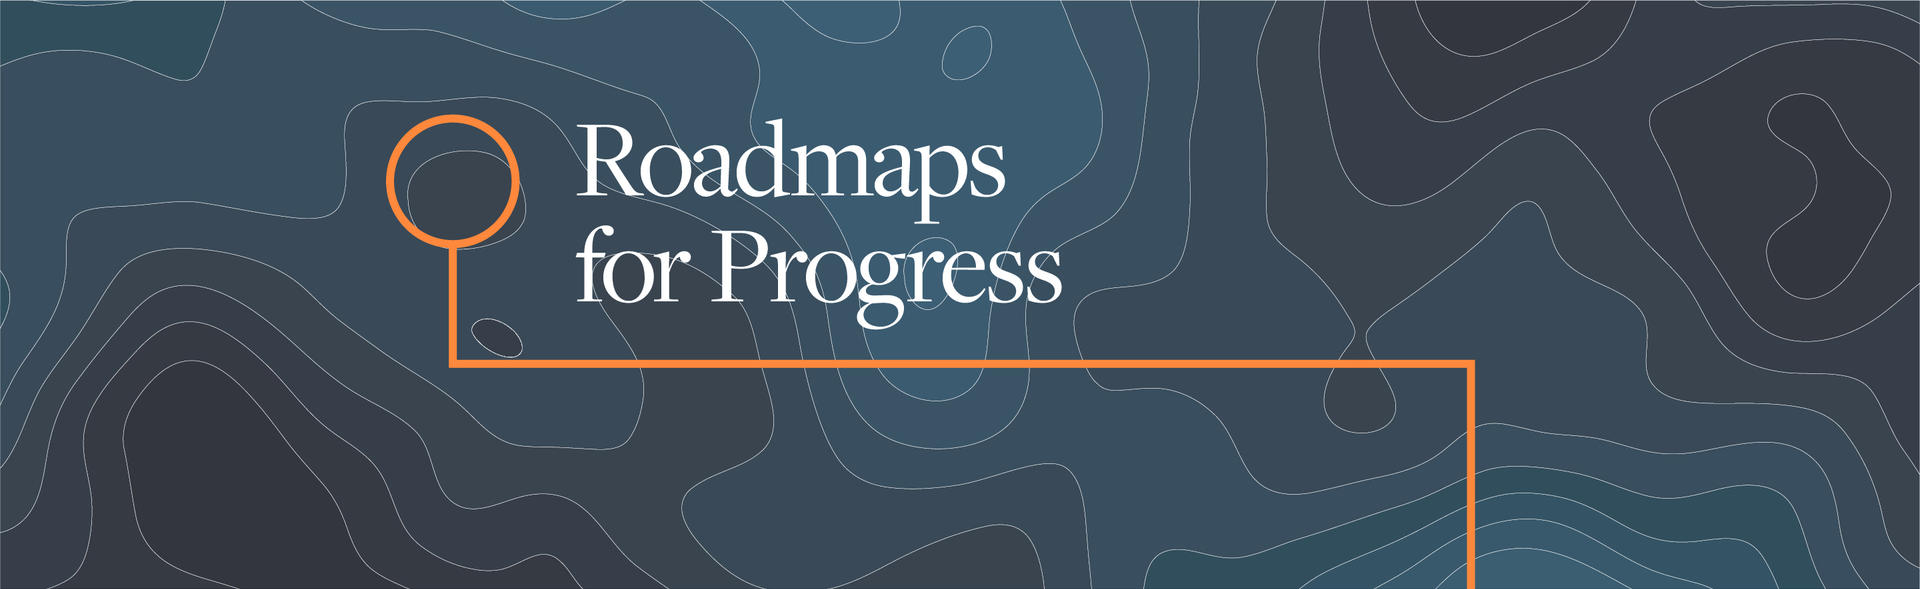 2017 Annual Report cover, titled "Roadmaps for Progress."